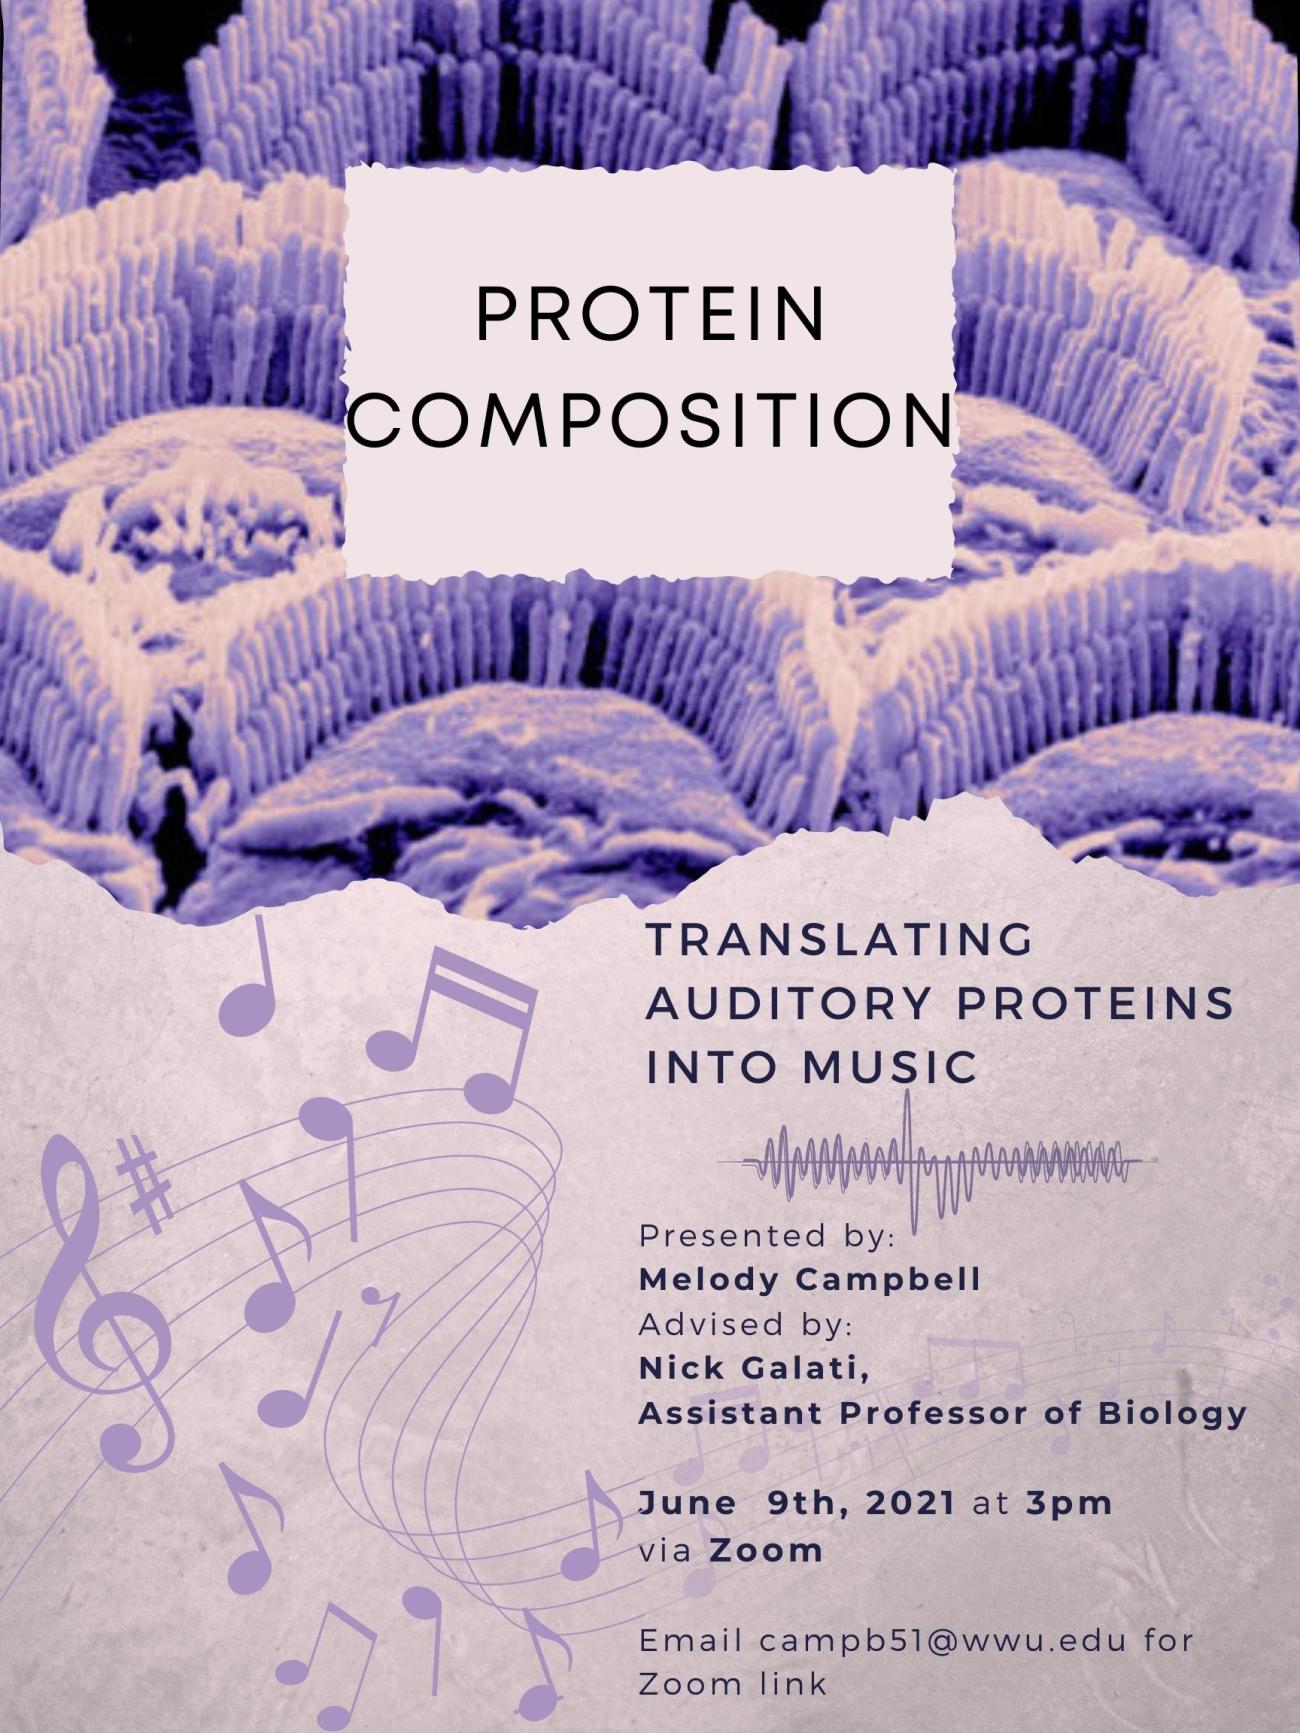 Light purple poster with a blown-up photo of proteins at the top, and clip art of a musical staff with notes next to text that reads: "Protein Composition: Translating Auditory Proteins into Music. Presented by Melody Campbell. Advised by Nick Galati, assistant professor of Biology. June 9th, 2021 at 3pm. Email campb51@wwu.edu for Zoom link." For disability accommodations please email honors@wwu.edu